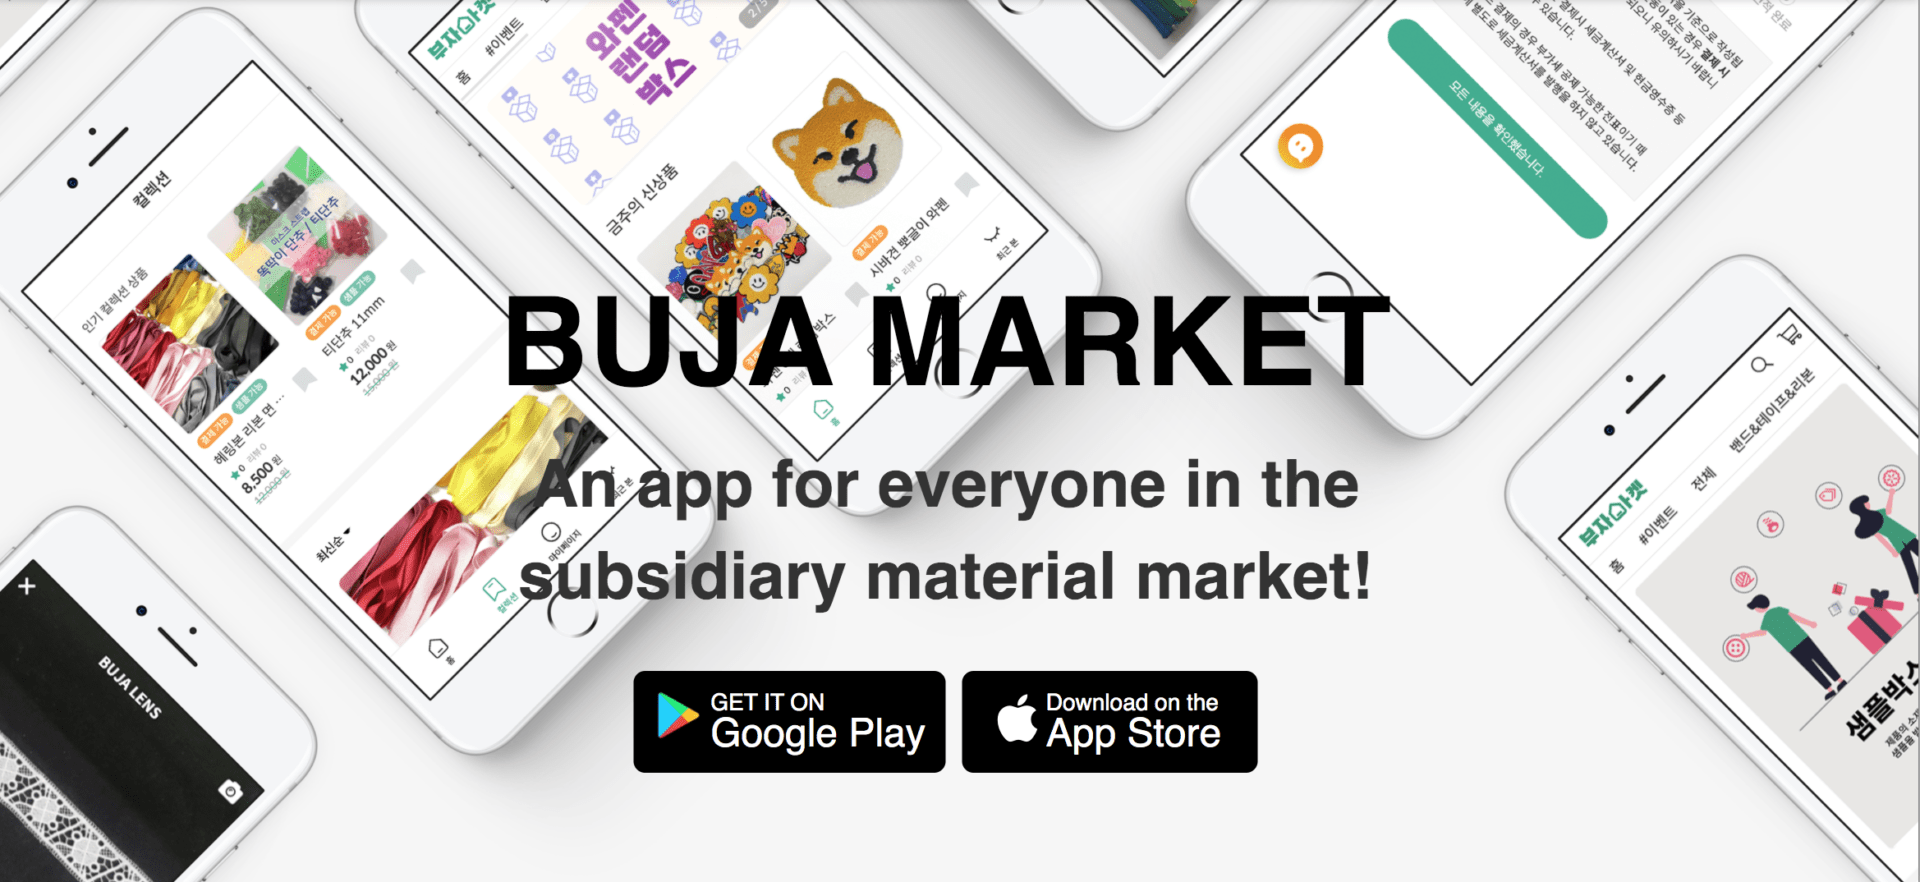 Buja Market serves fashion manufacturers for source material.